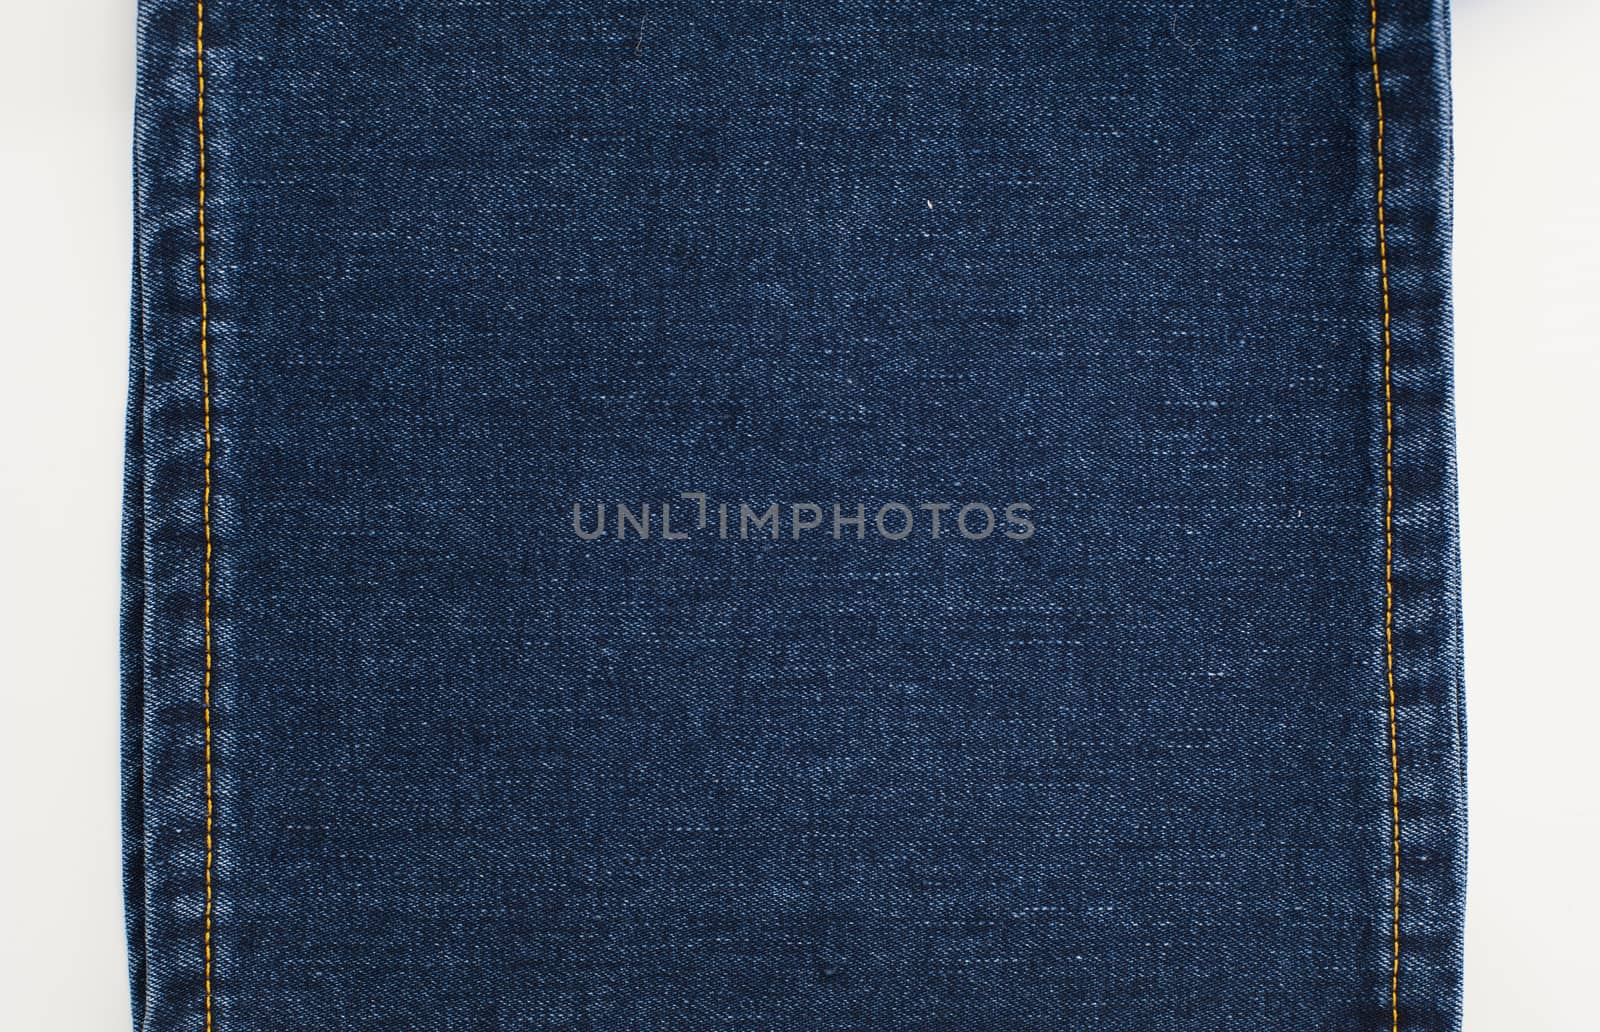 Jeans Denim Background with Stitches by jrkphoto